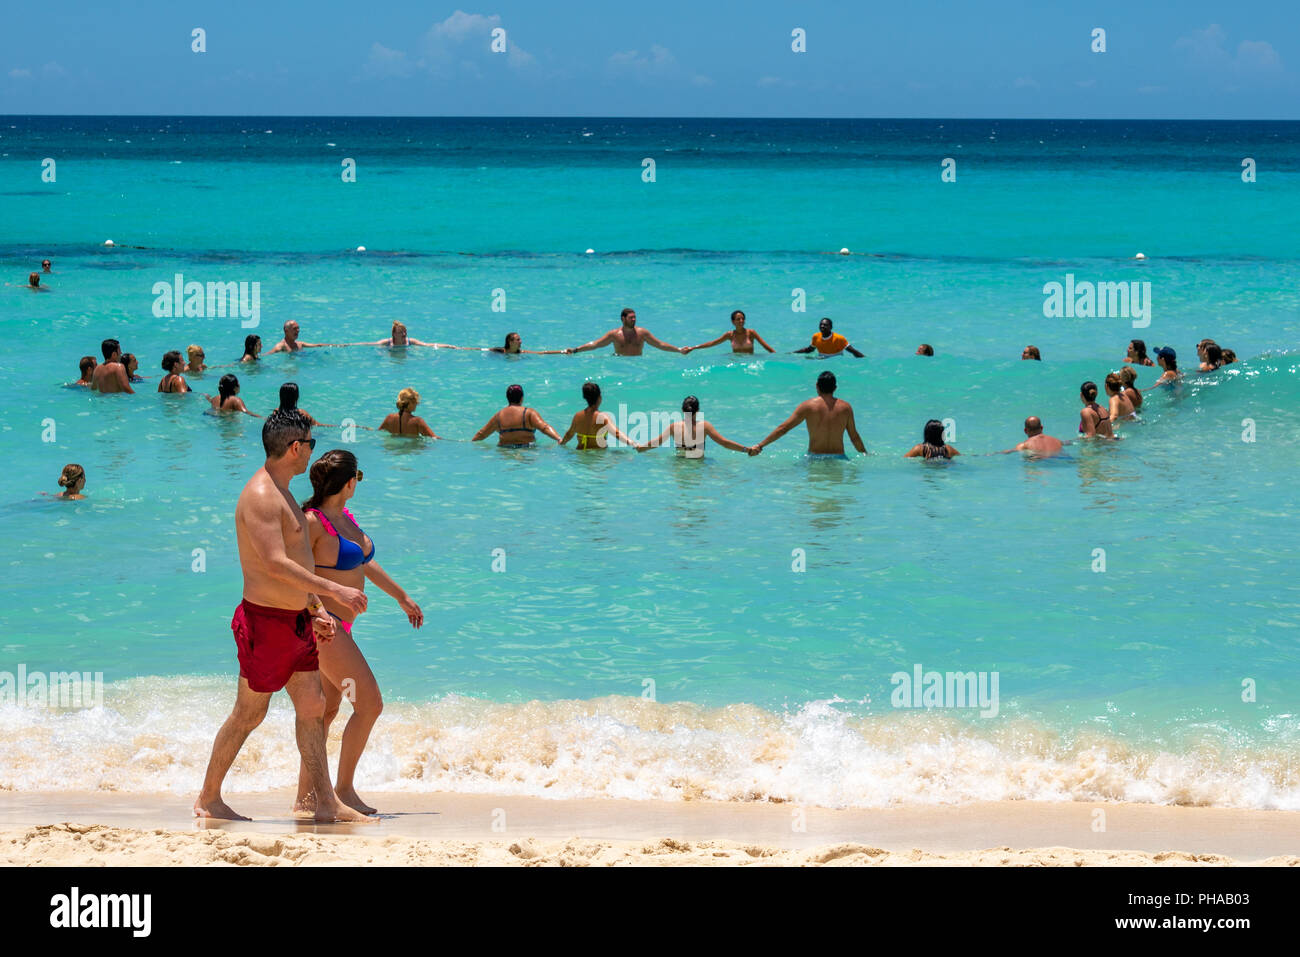 Bayahibe, Dominican Republic, 27 August 2018.  Sunbathers watch an aquafit fitness class for tourists at a Caribbean sea resort. Photo by Enrique Shor Stock Photo